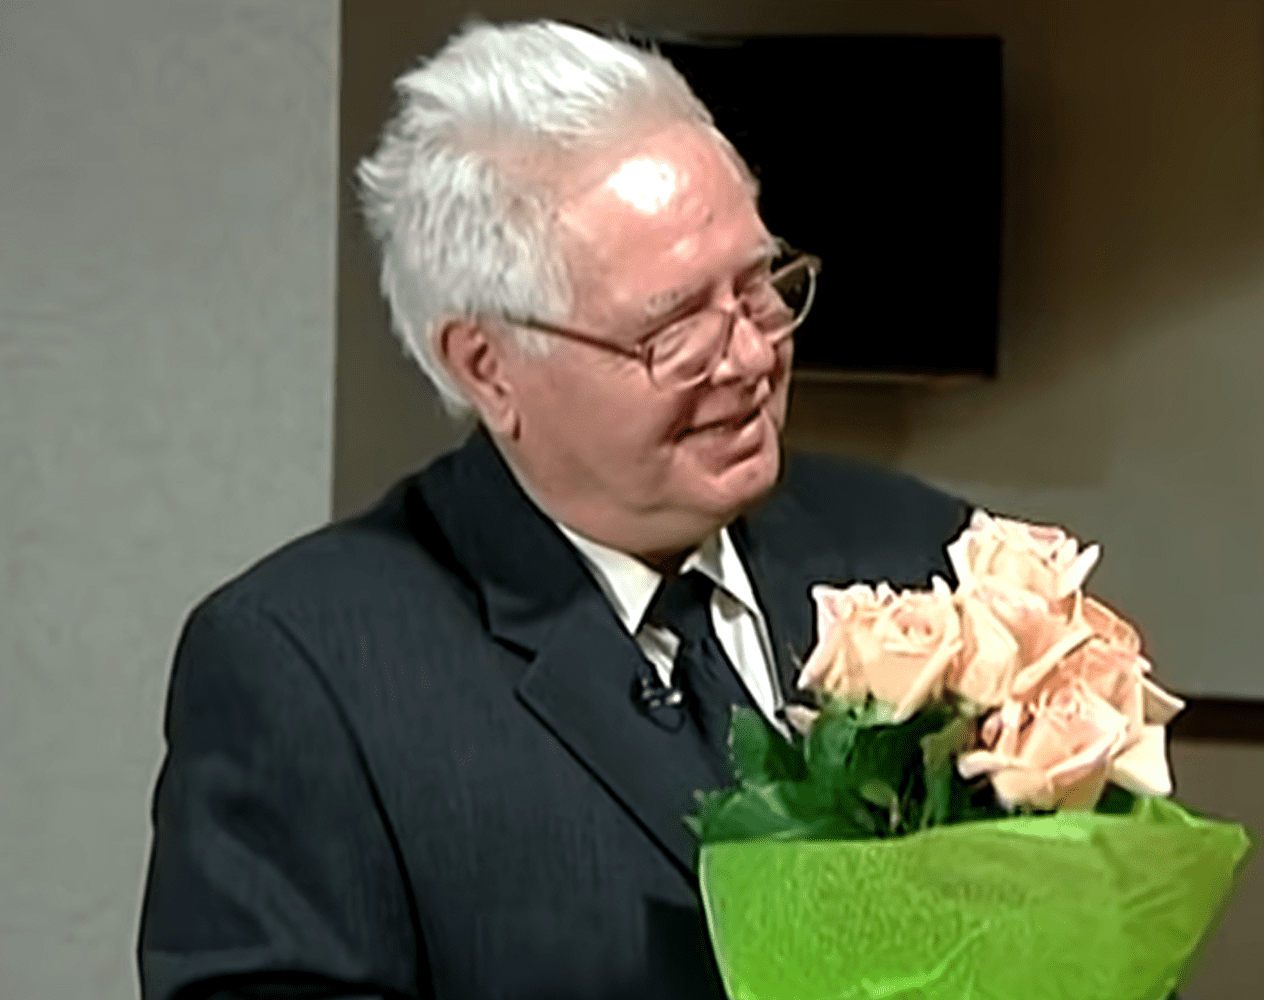 Clifford Boyson holding pink roses. │Source: youtube.com/ABC News